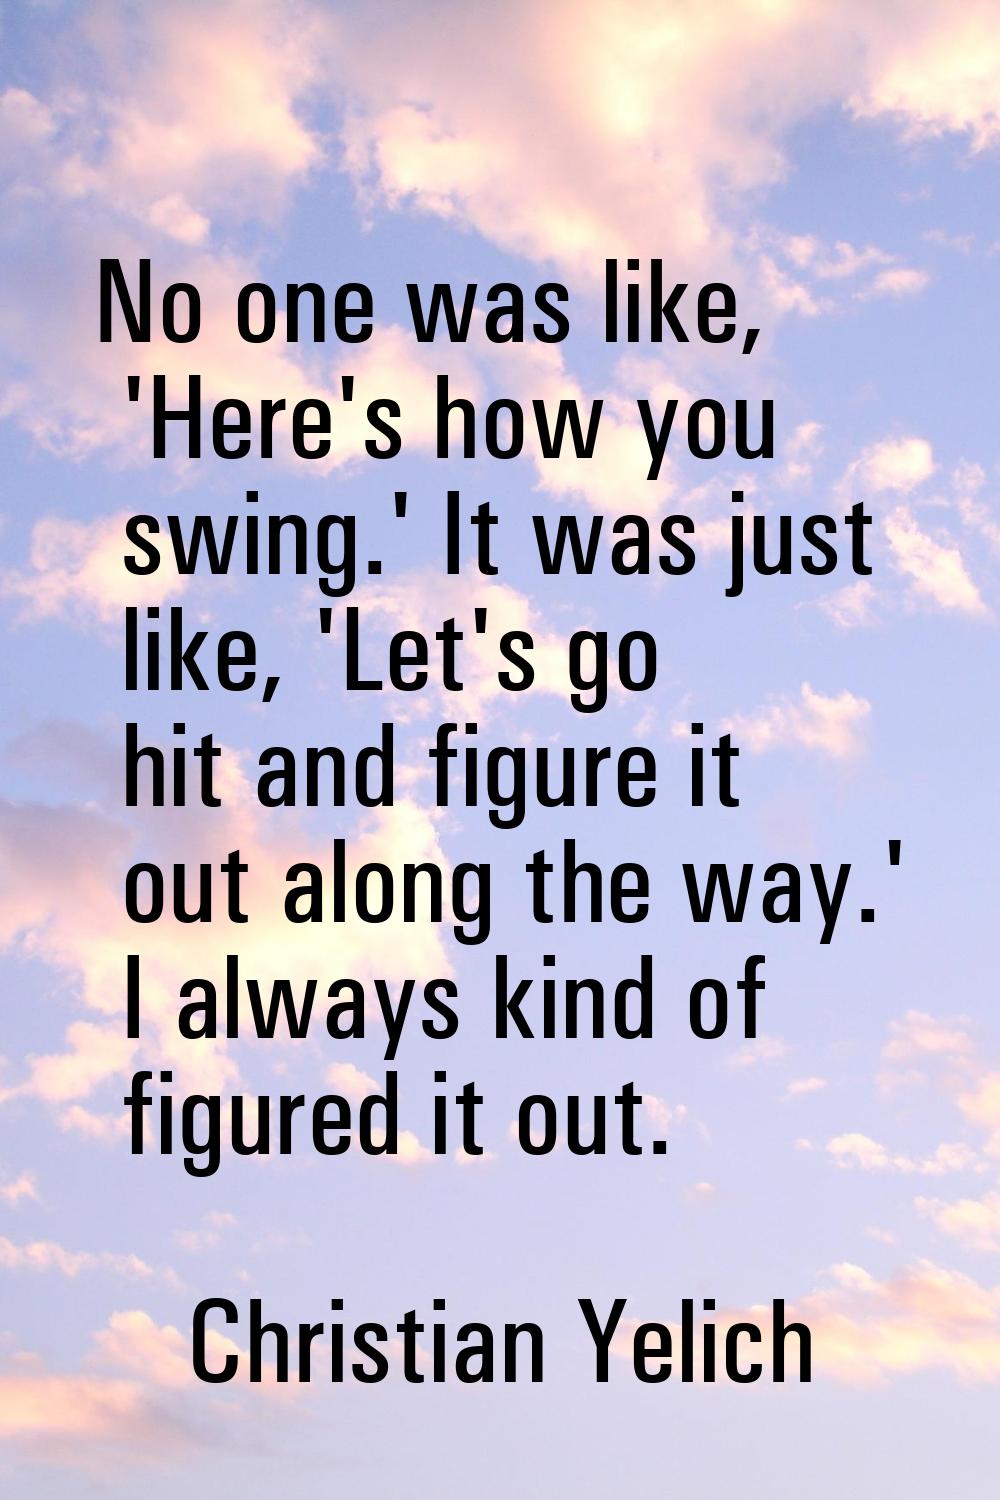 No one was like, 'Here's how you swing.' It was just like, 'Let's go hit and figure it out along th